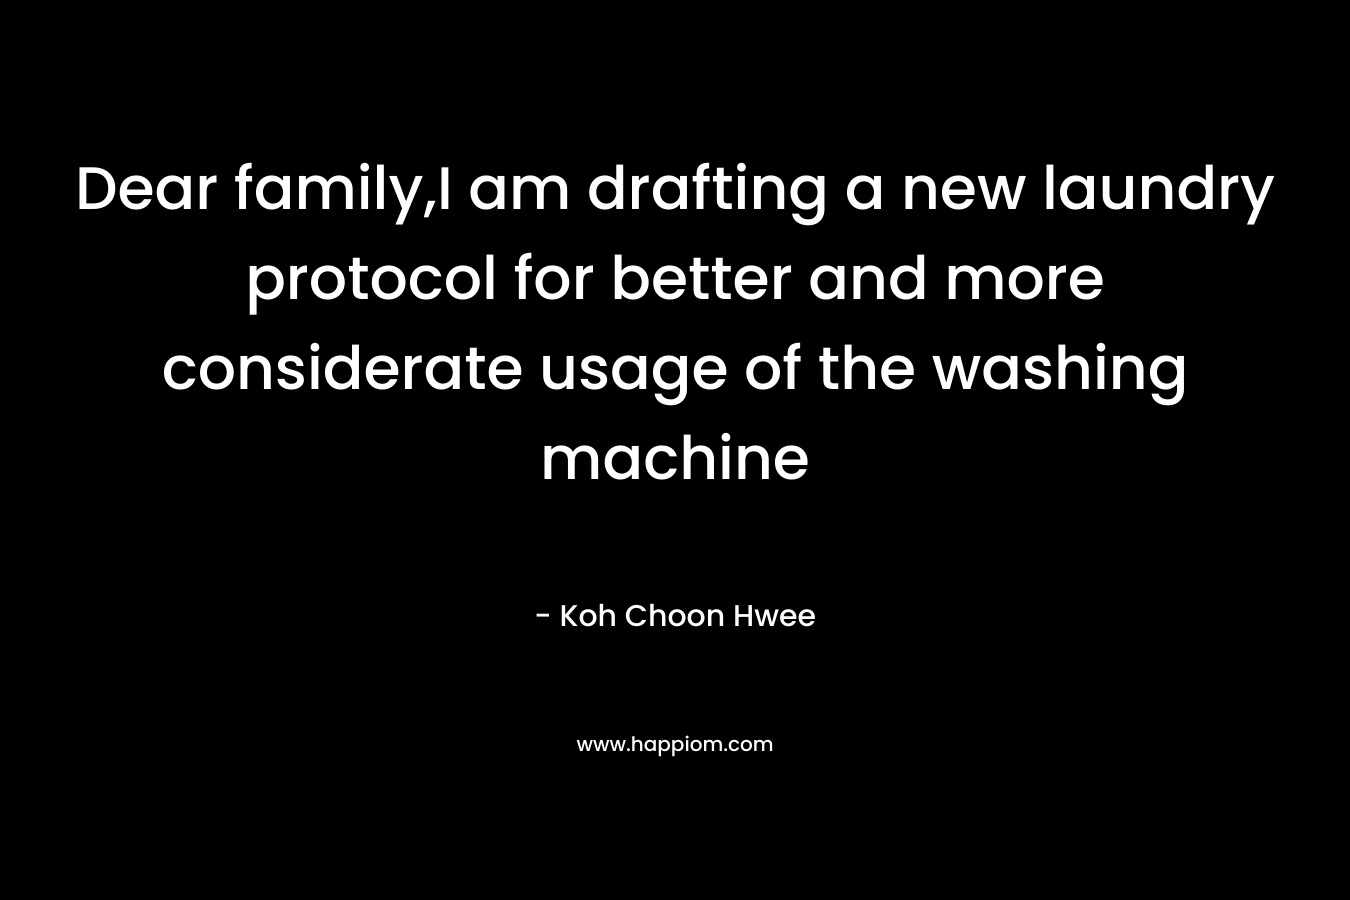 Dear family,I am drafting a new laundry protocol for better and more considerate usage of the washing machine – Koh Choon Hwee